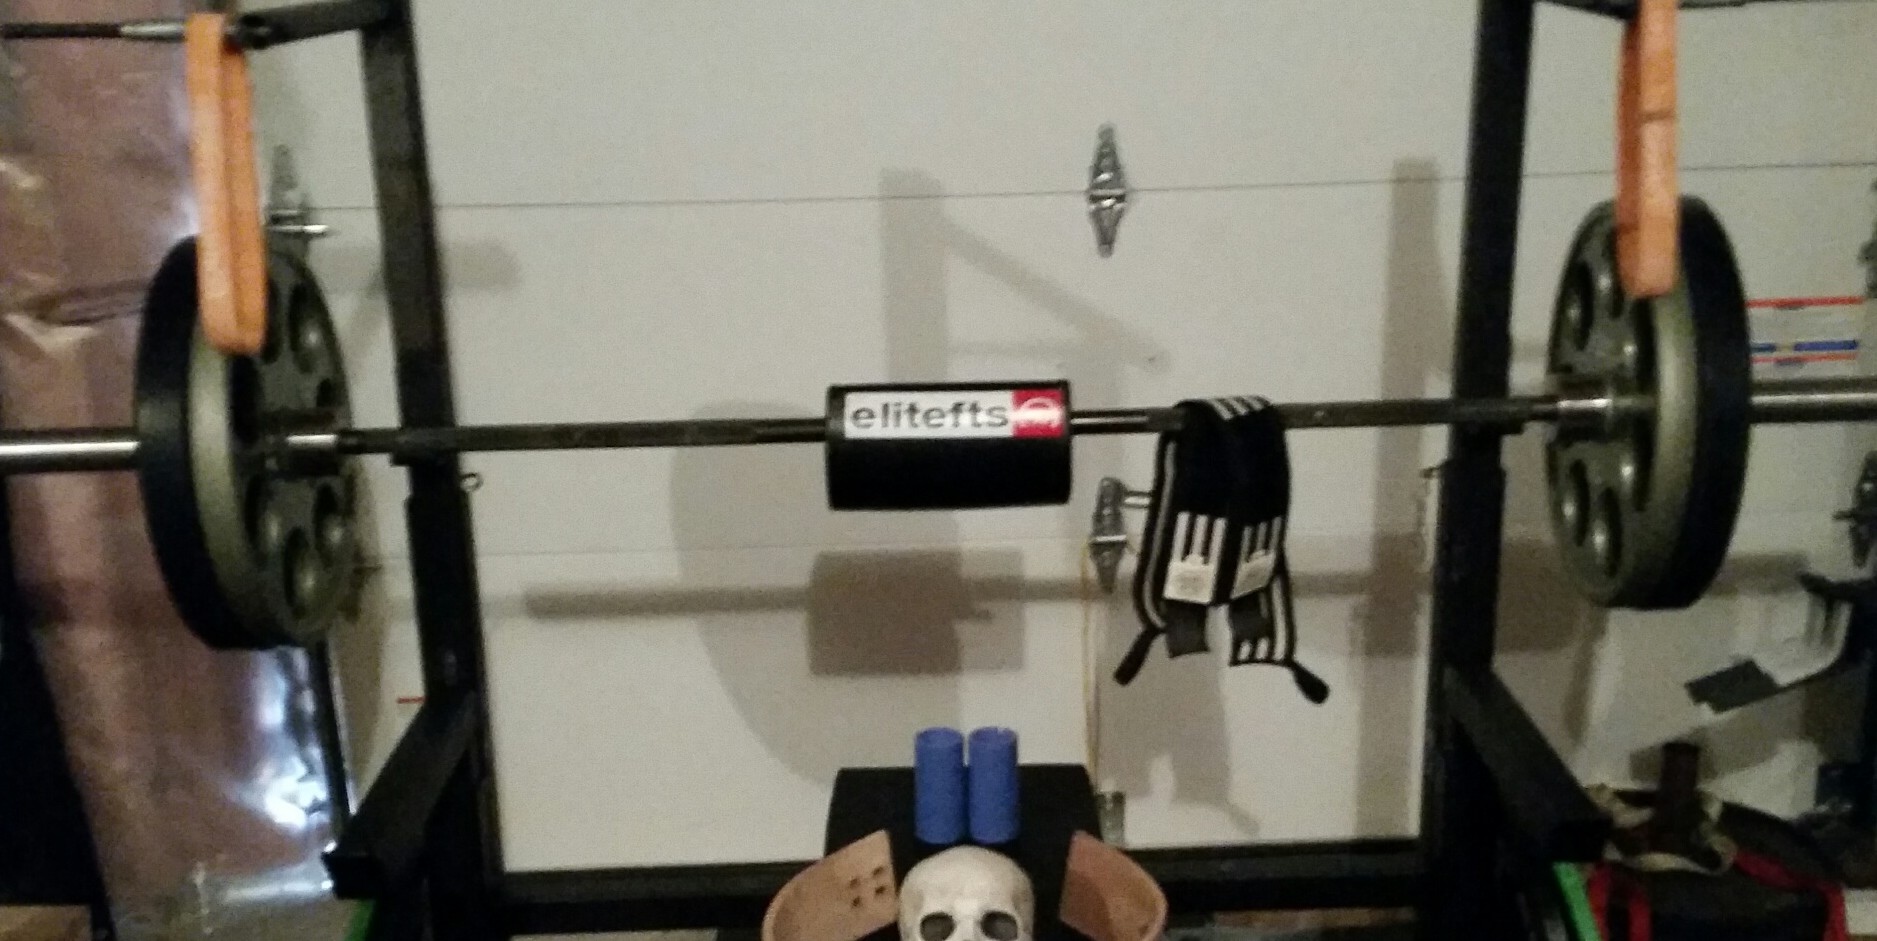 Reverse Band Bench With Frankenstein's Creation! (w/video's)